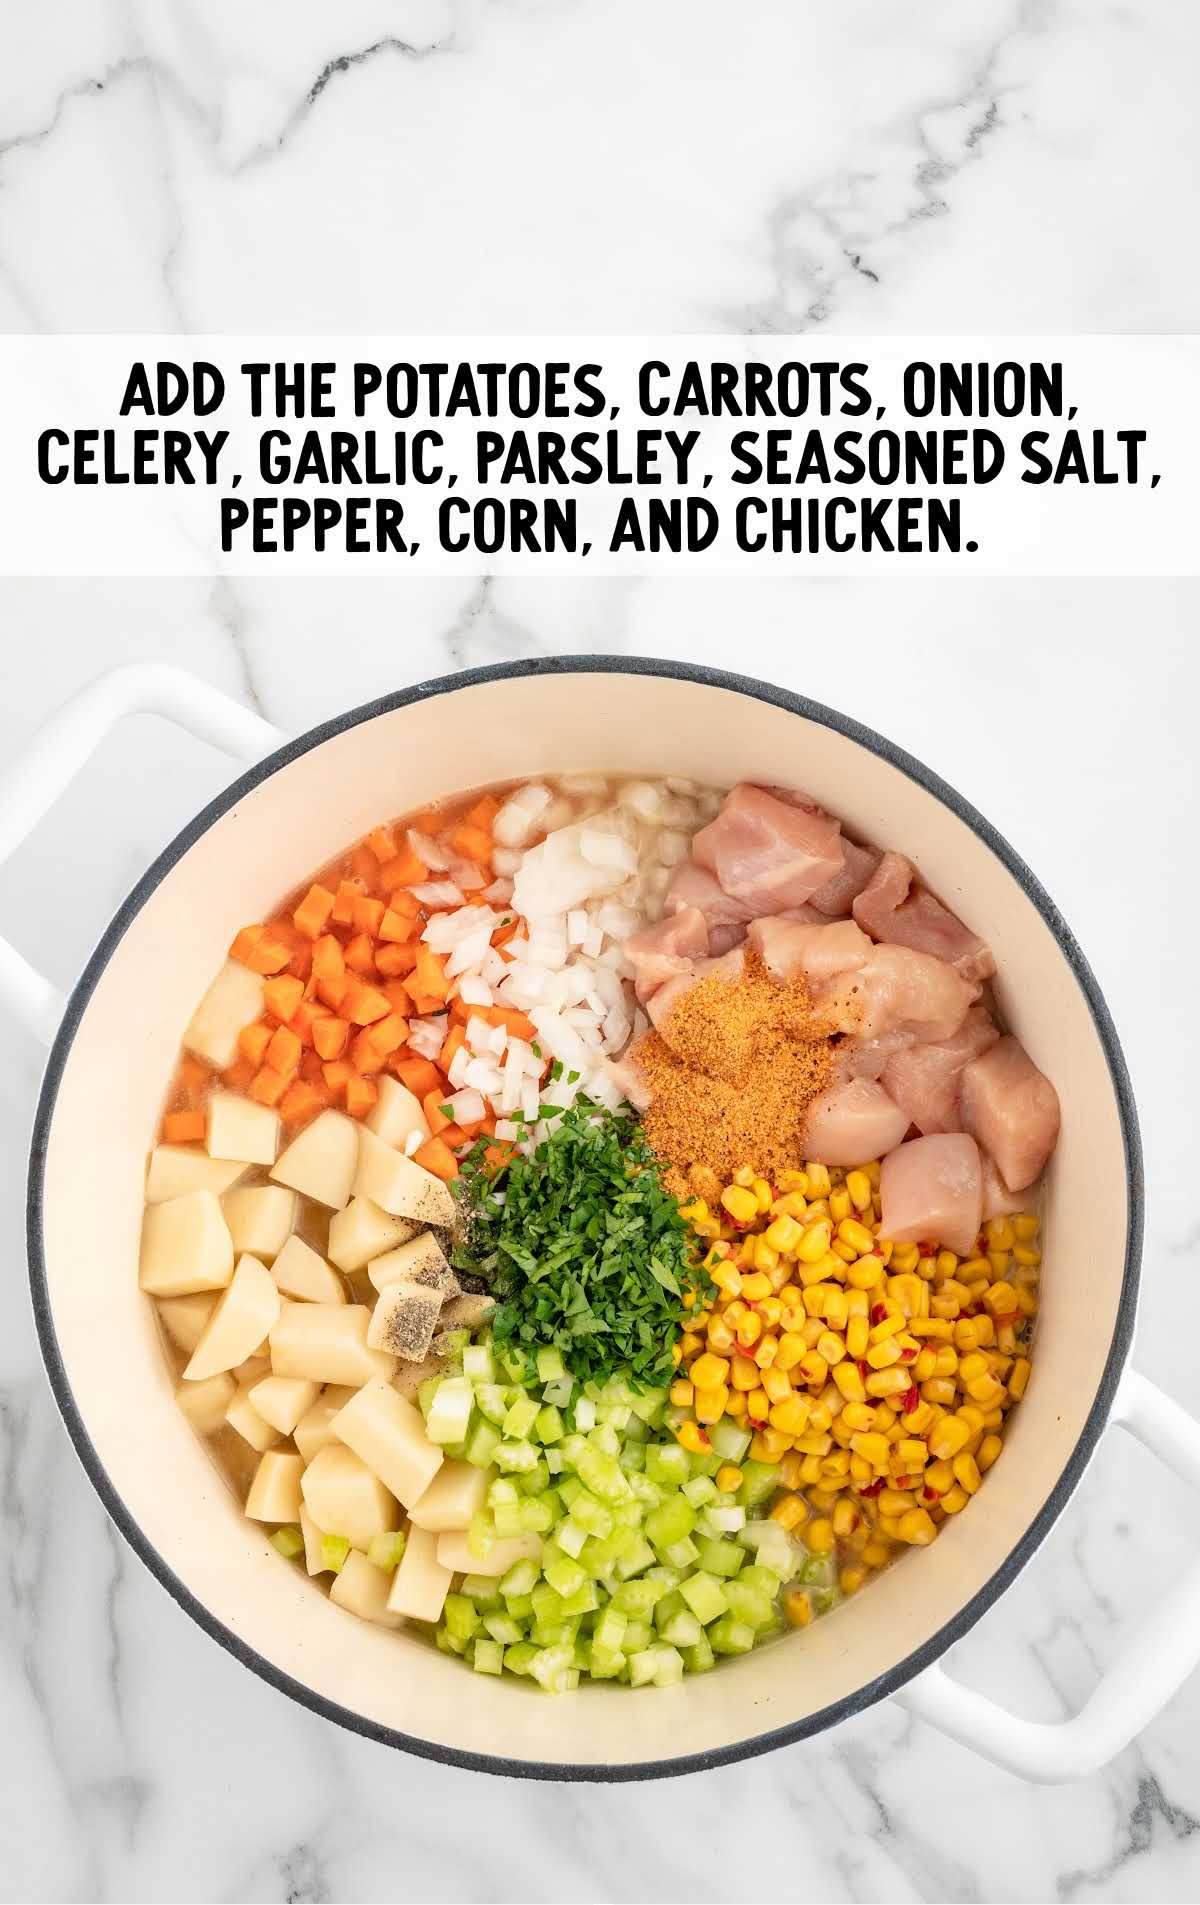 potatoes, carrots, onion, celery, garlic, parsley, salt, pepper, corn, and chicken cooked in a pot